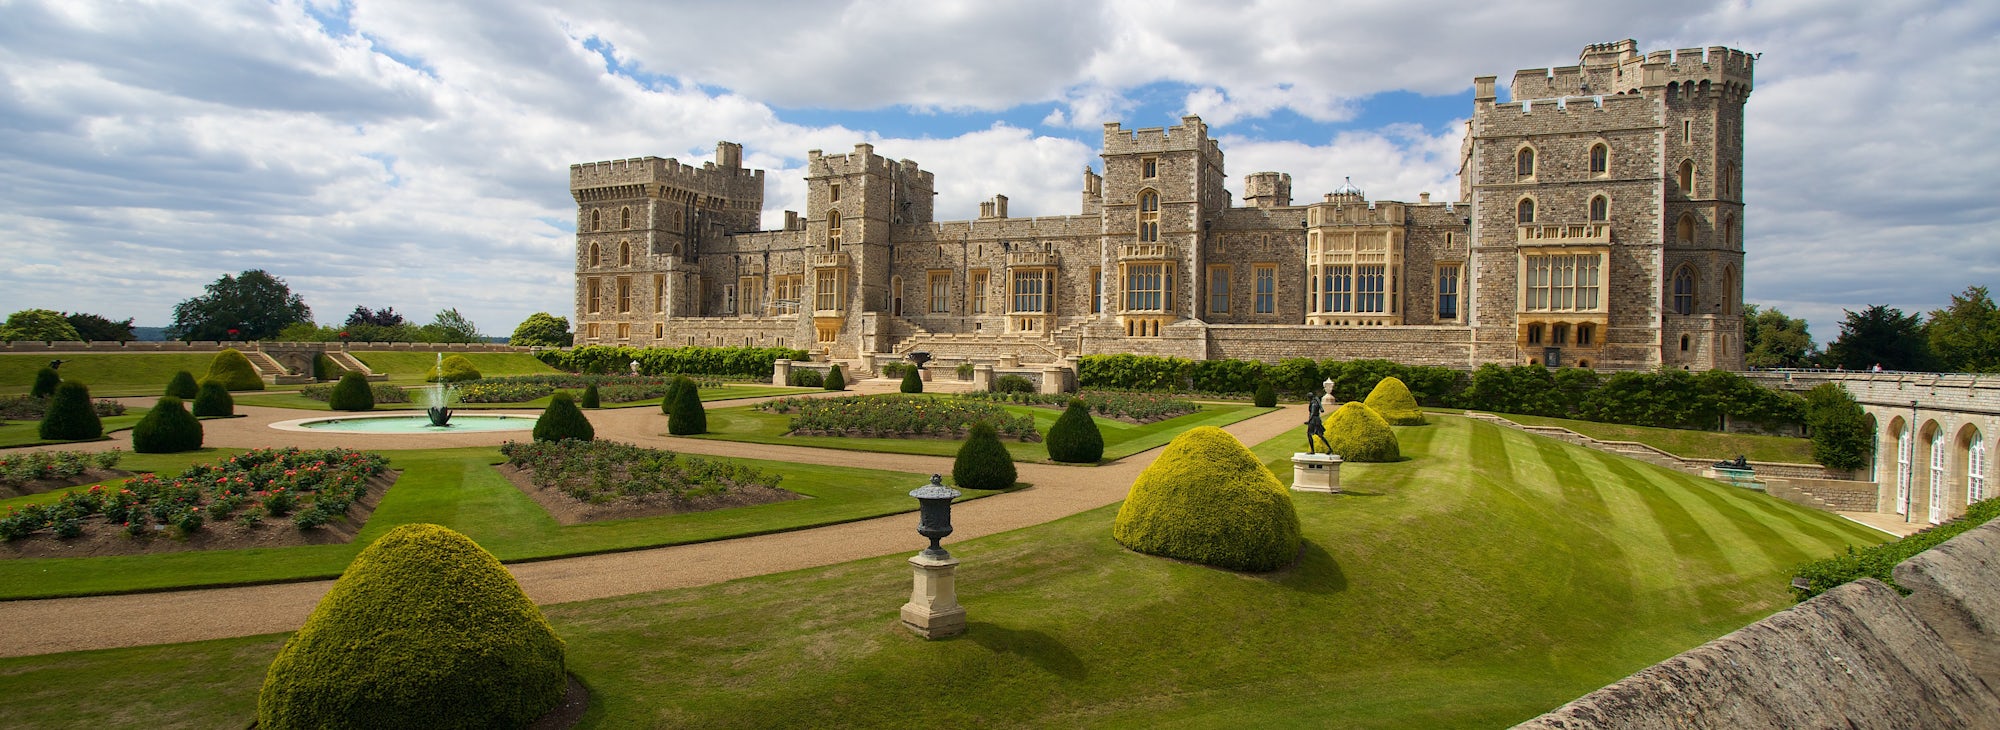 Windsor Castle and Lawns